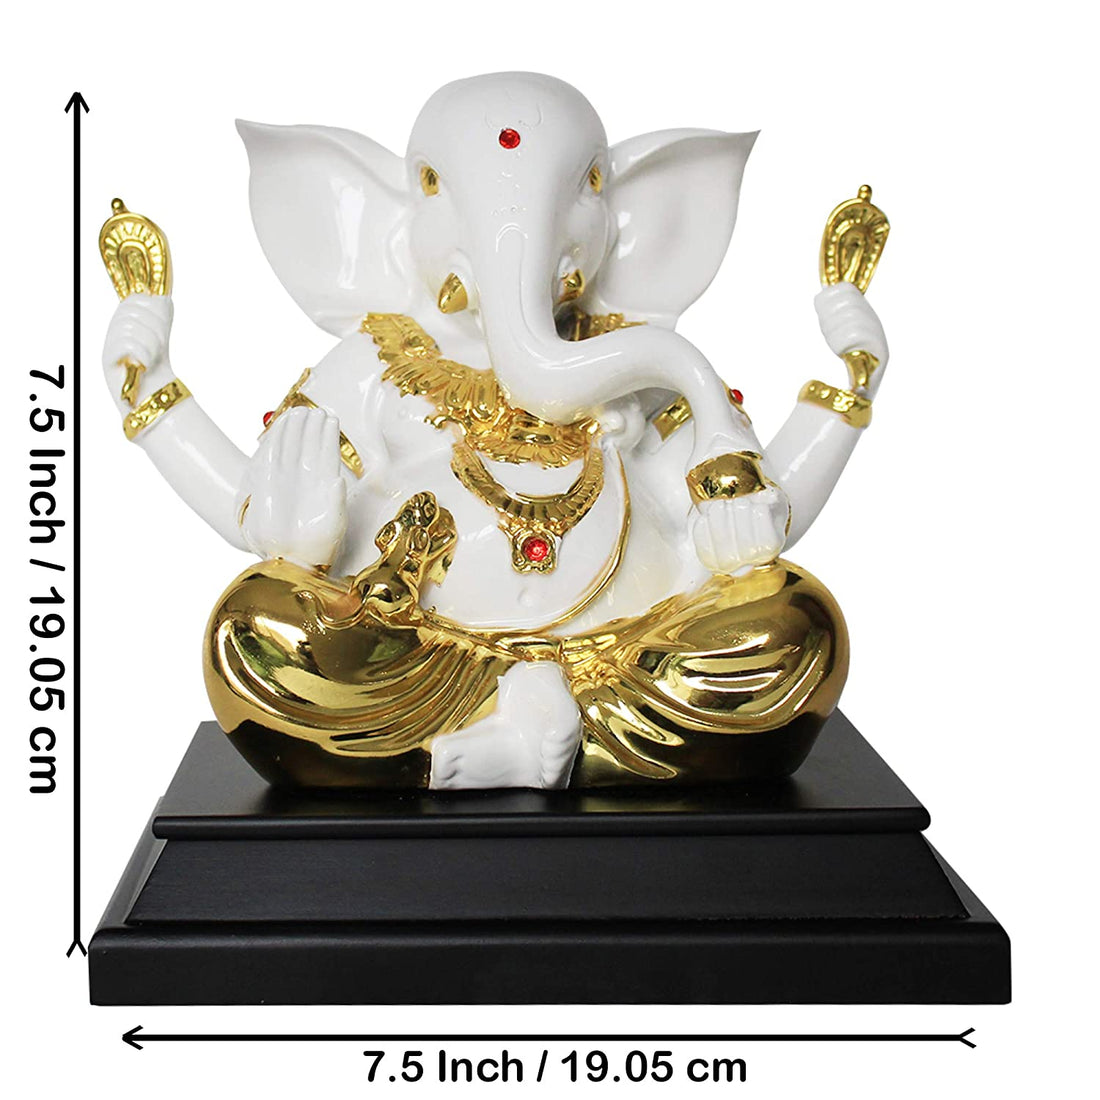 24K Gold Plated Ganesha Idol with Wooden Base - White (7.5 Inch)